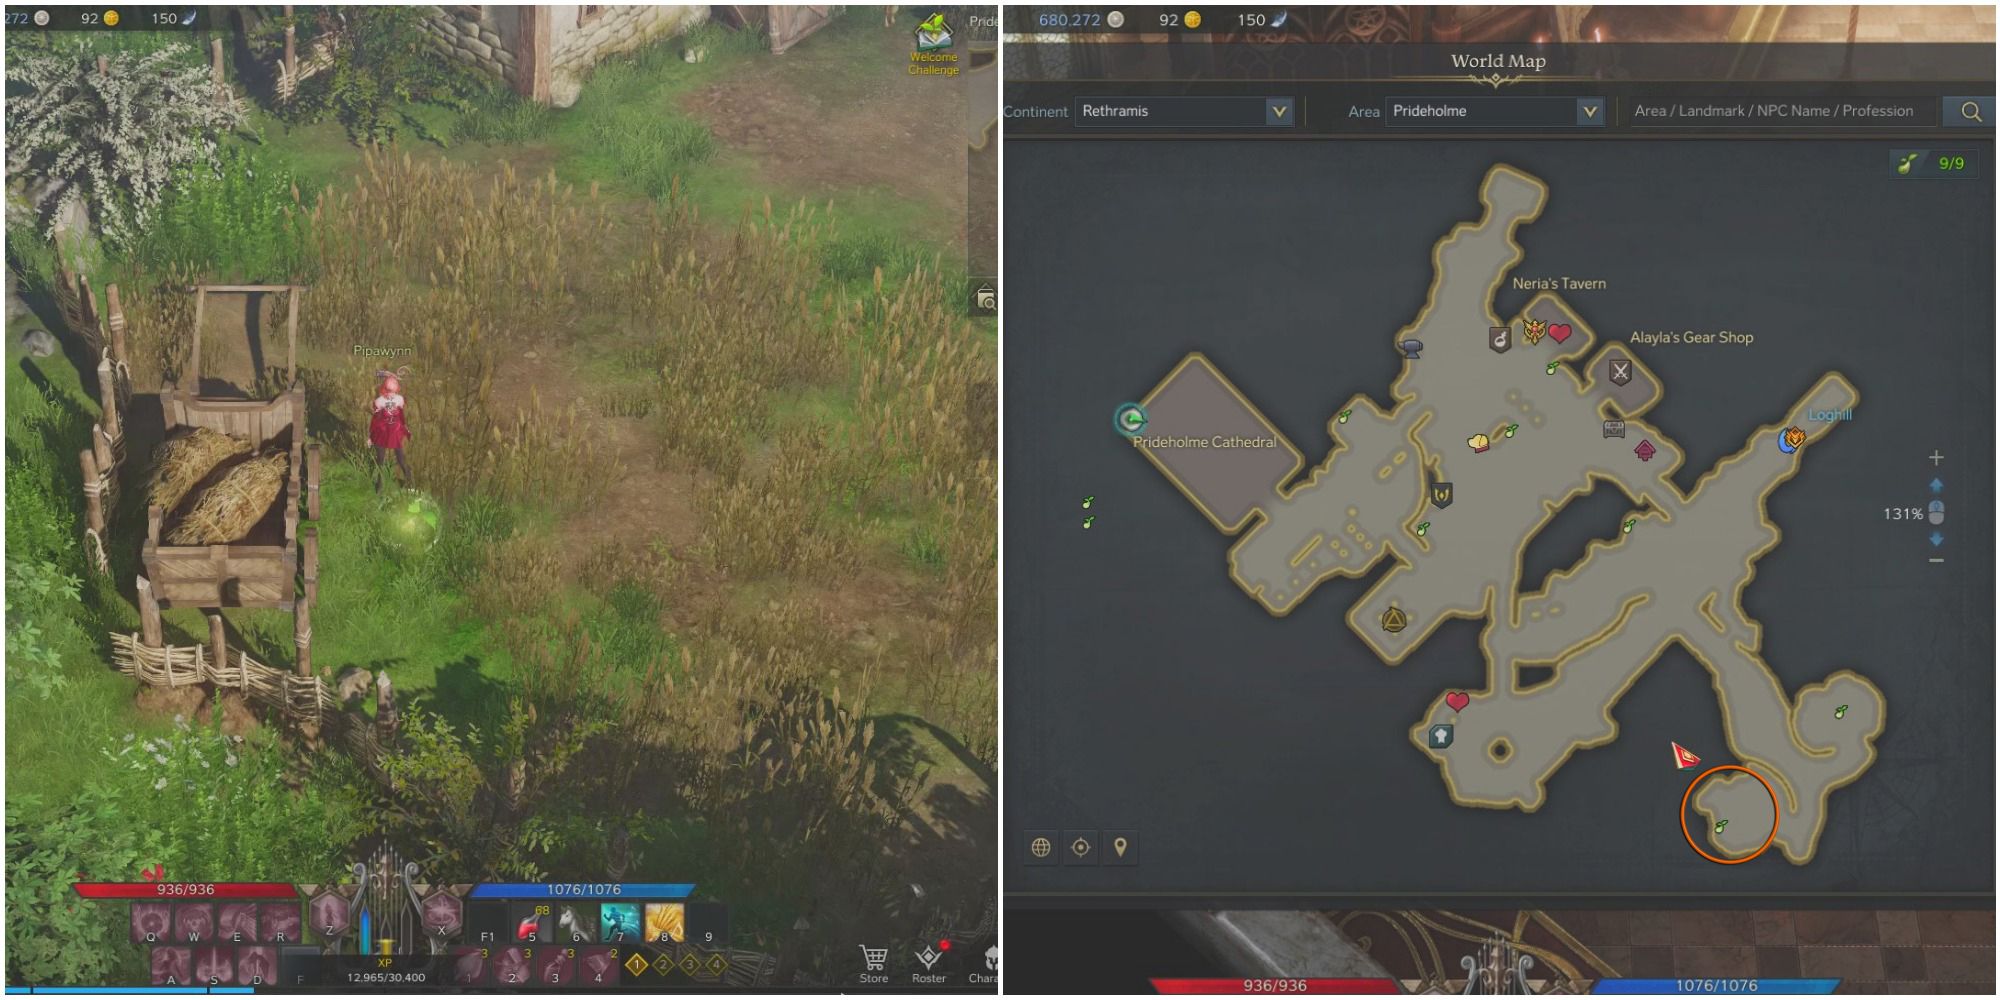 A split image of a bard standing next to a Mokoko Seed in a farm field and a map of Prideholme